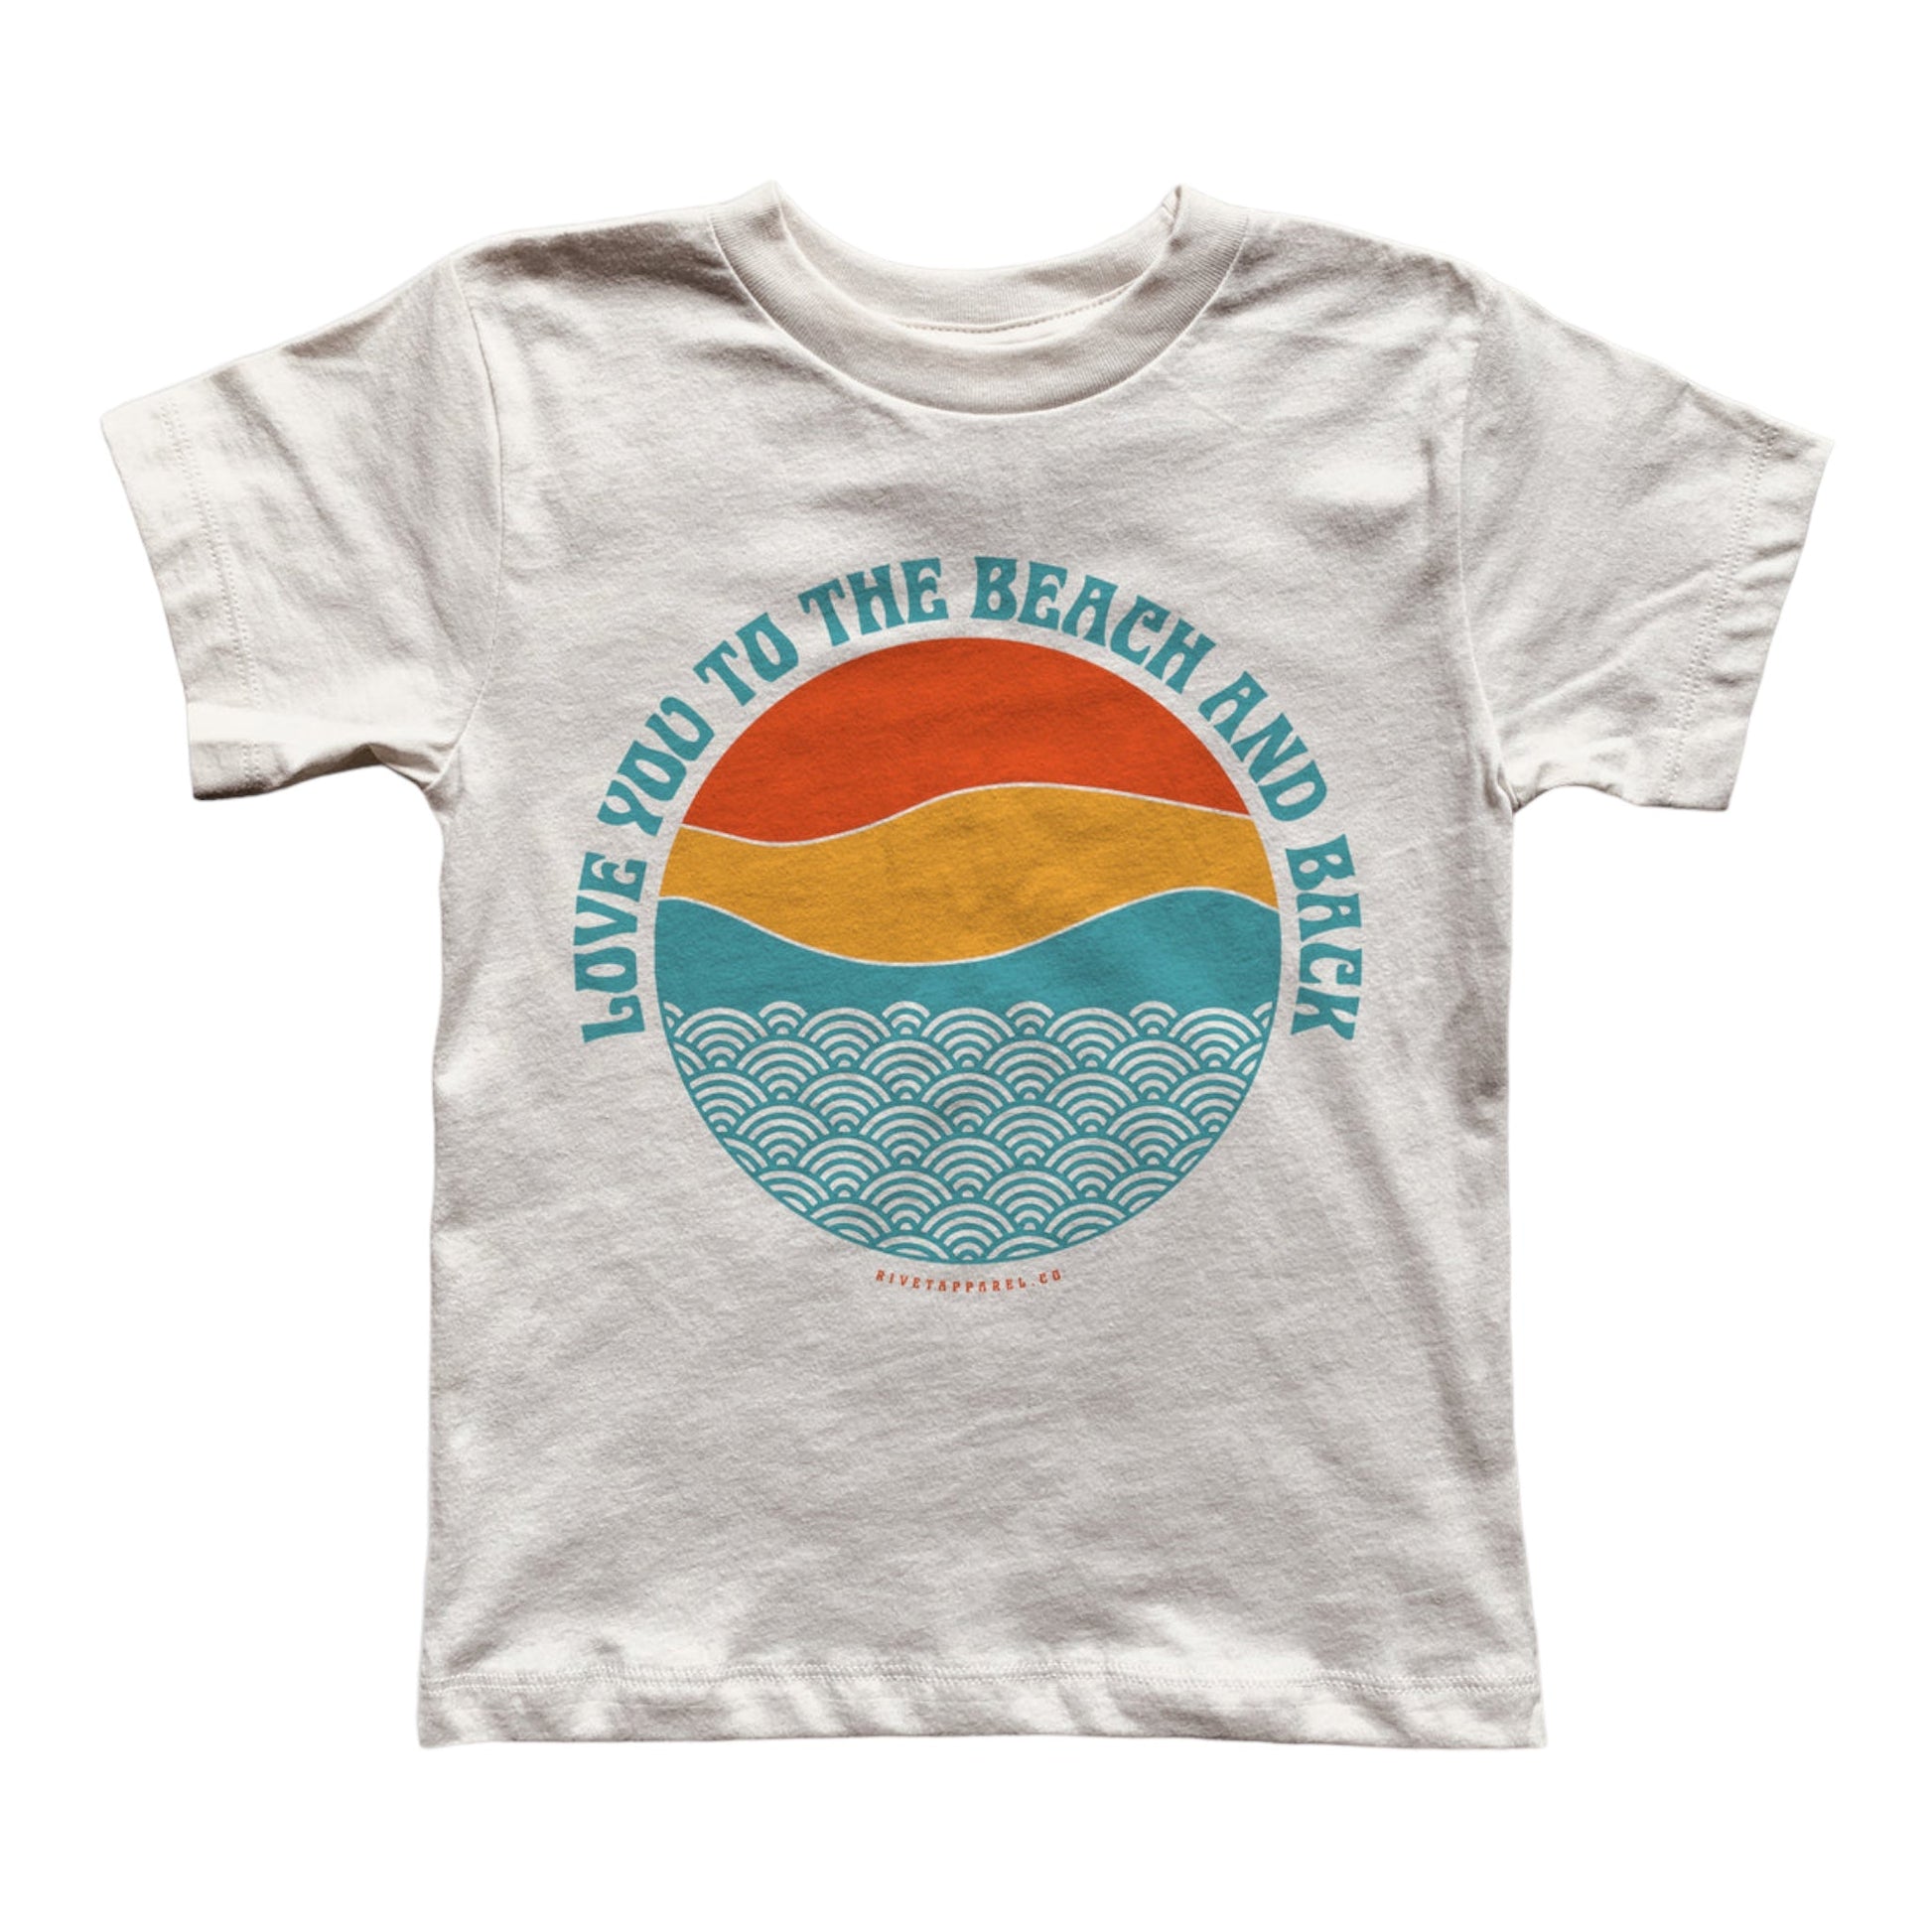 Beach & Back Tee - Something about Sofia